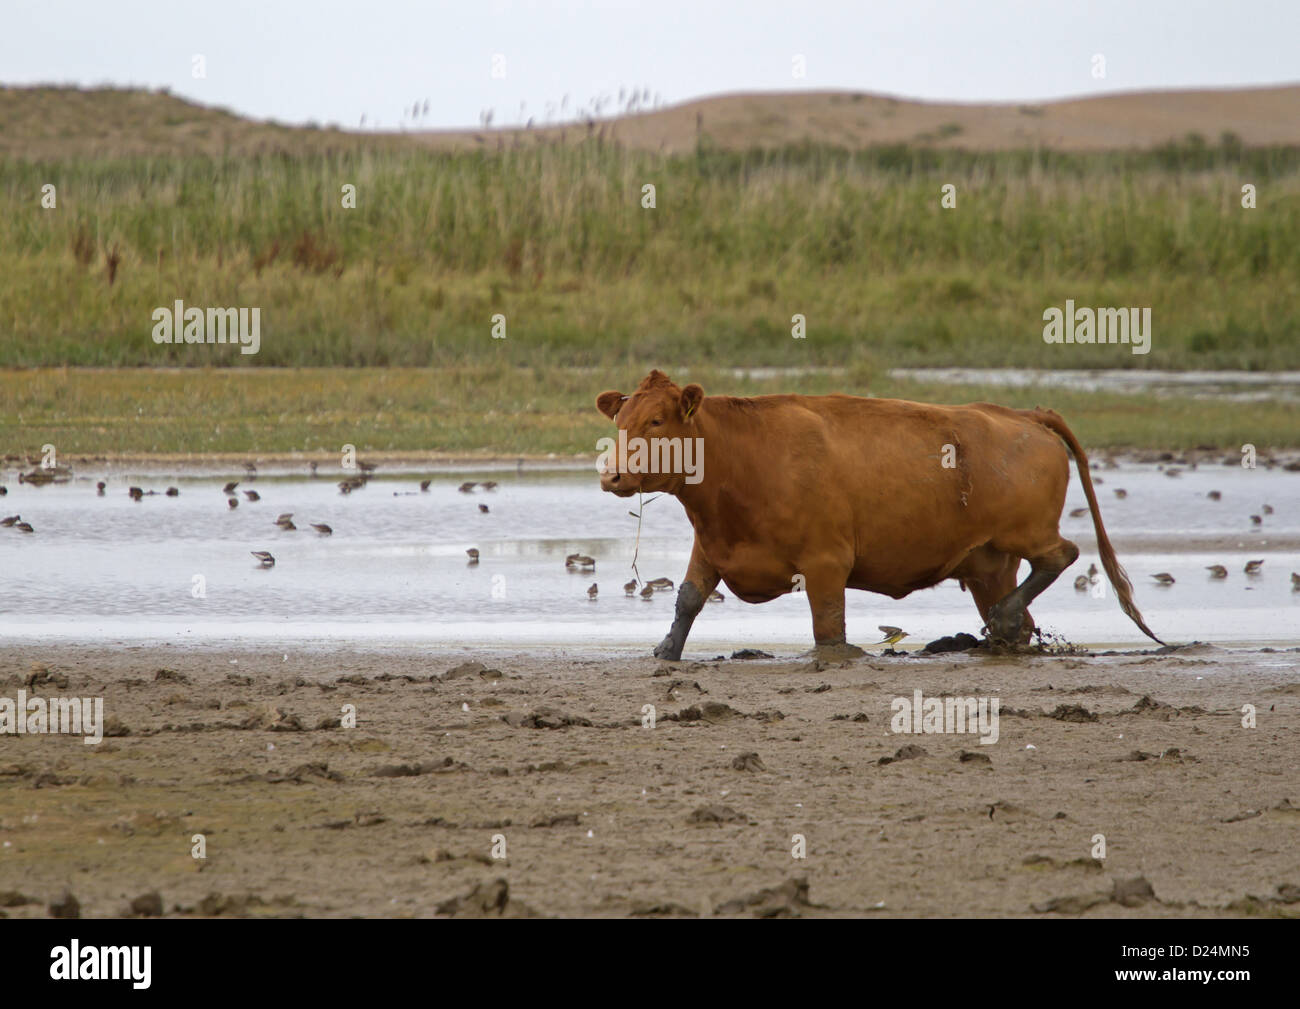 Domestic Cattle cow walking on mud edge water with waders used conservation grazing management on coastal wetland Cley Marshes Stock Photo